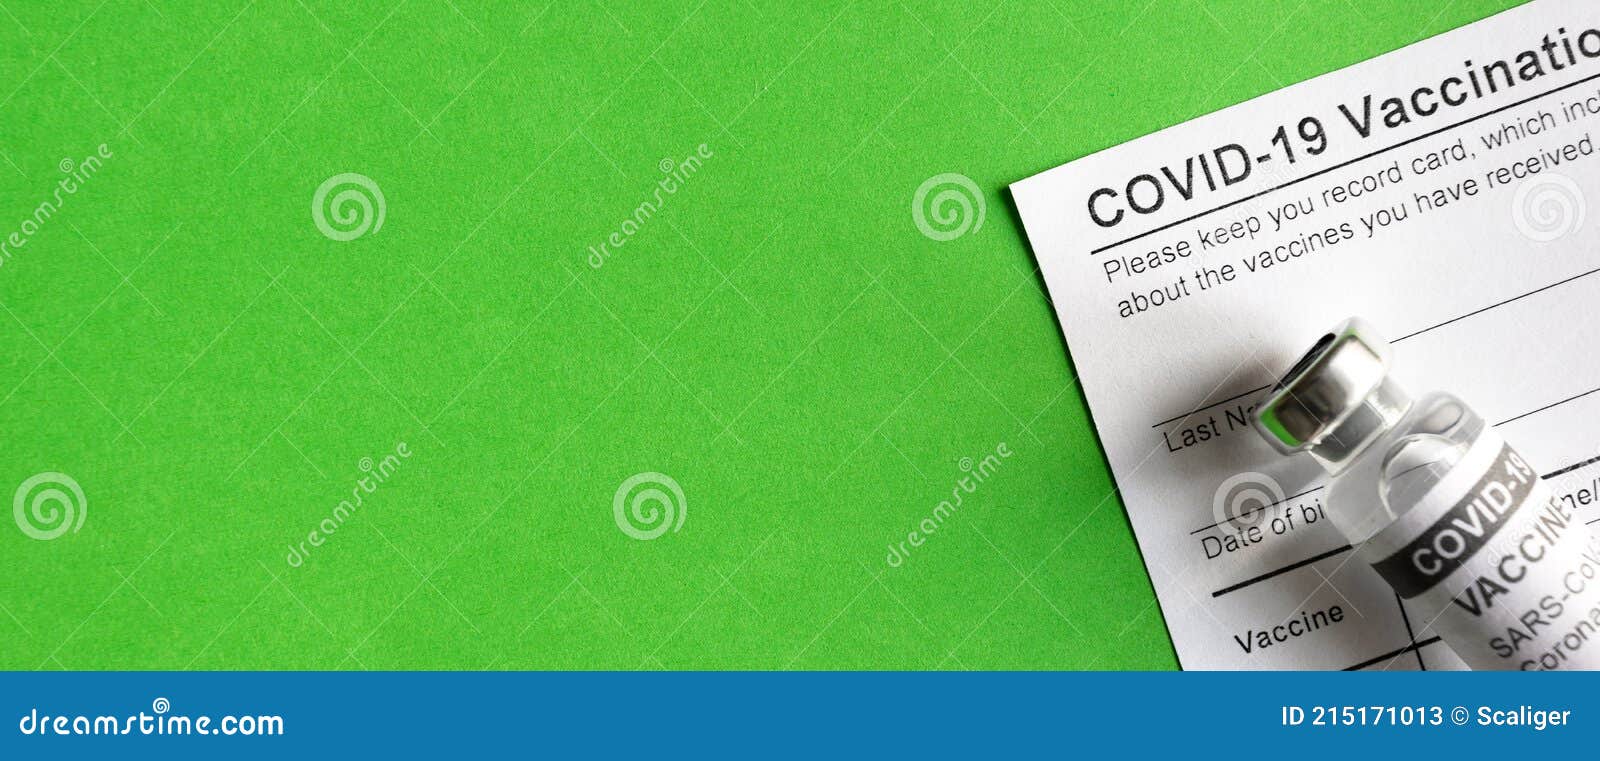 covid-19 vaccination record card on green background